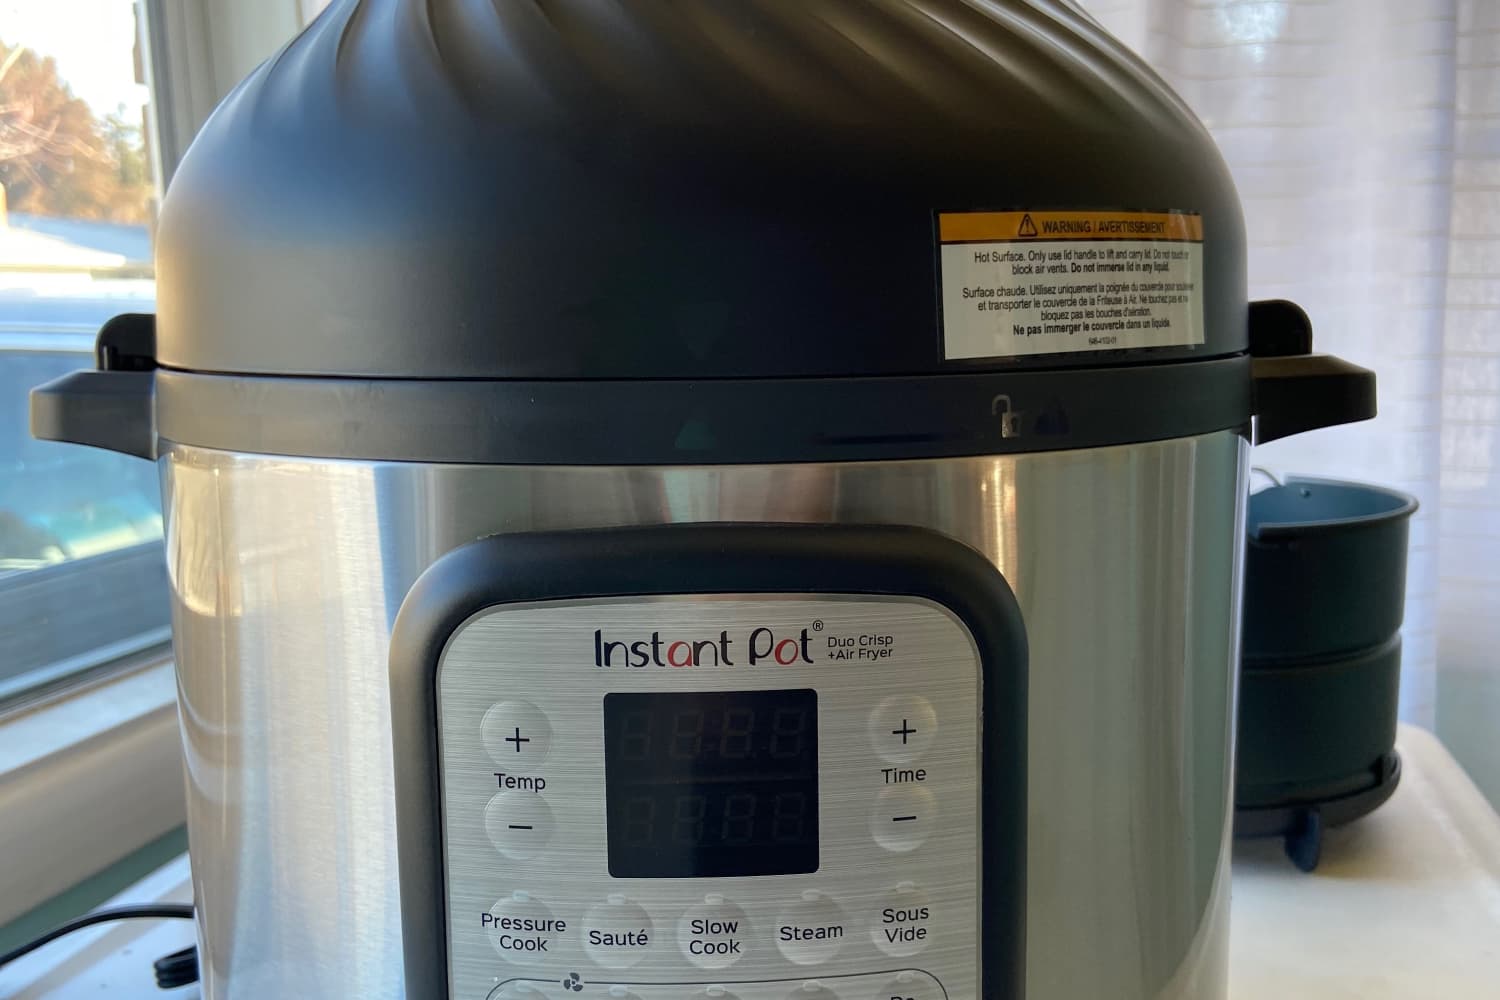 The Instant Pot Air Fryer Lid works as promised, but only for